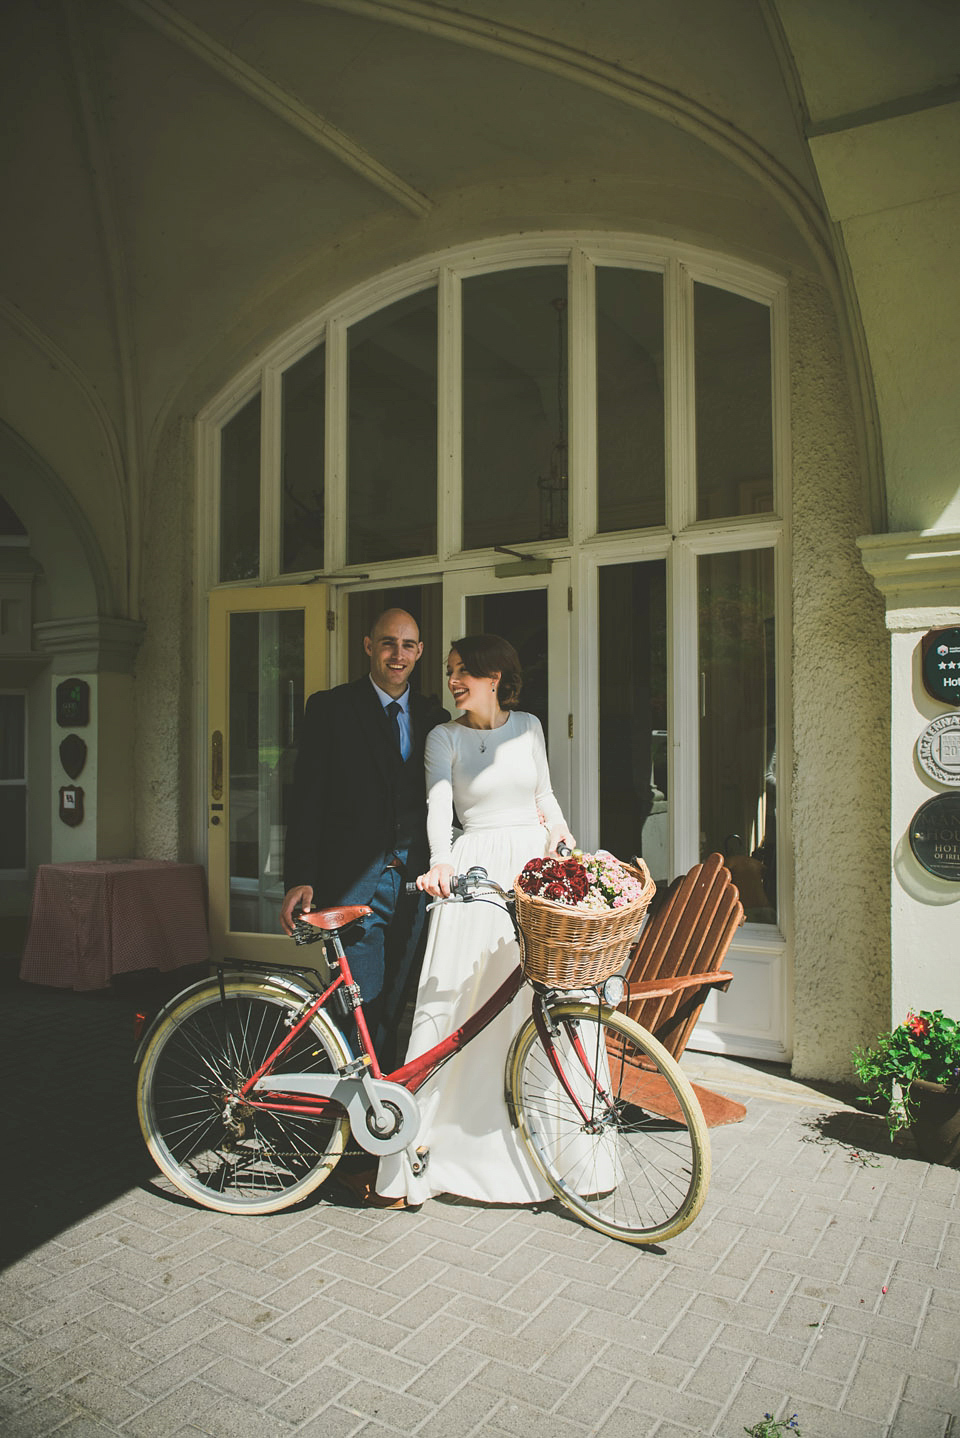 A long sleeved 1950's inspired wedding dress handmade by the bride herself. Photography by Paula Gillespie.